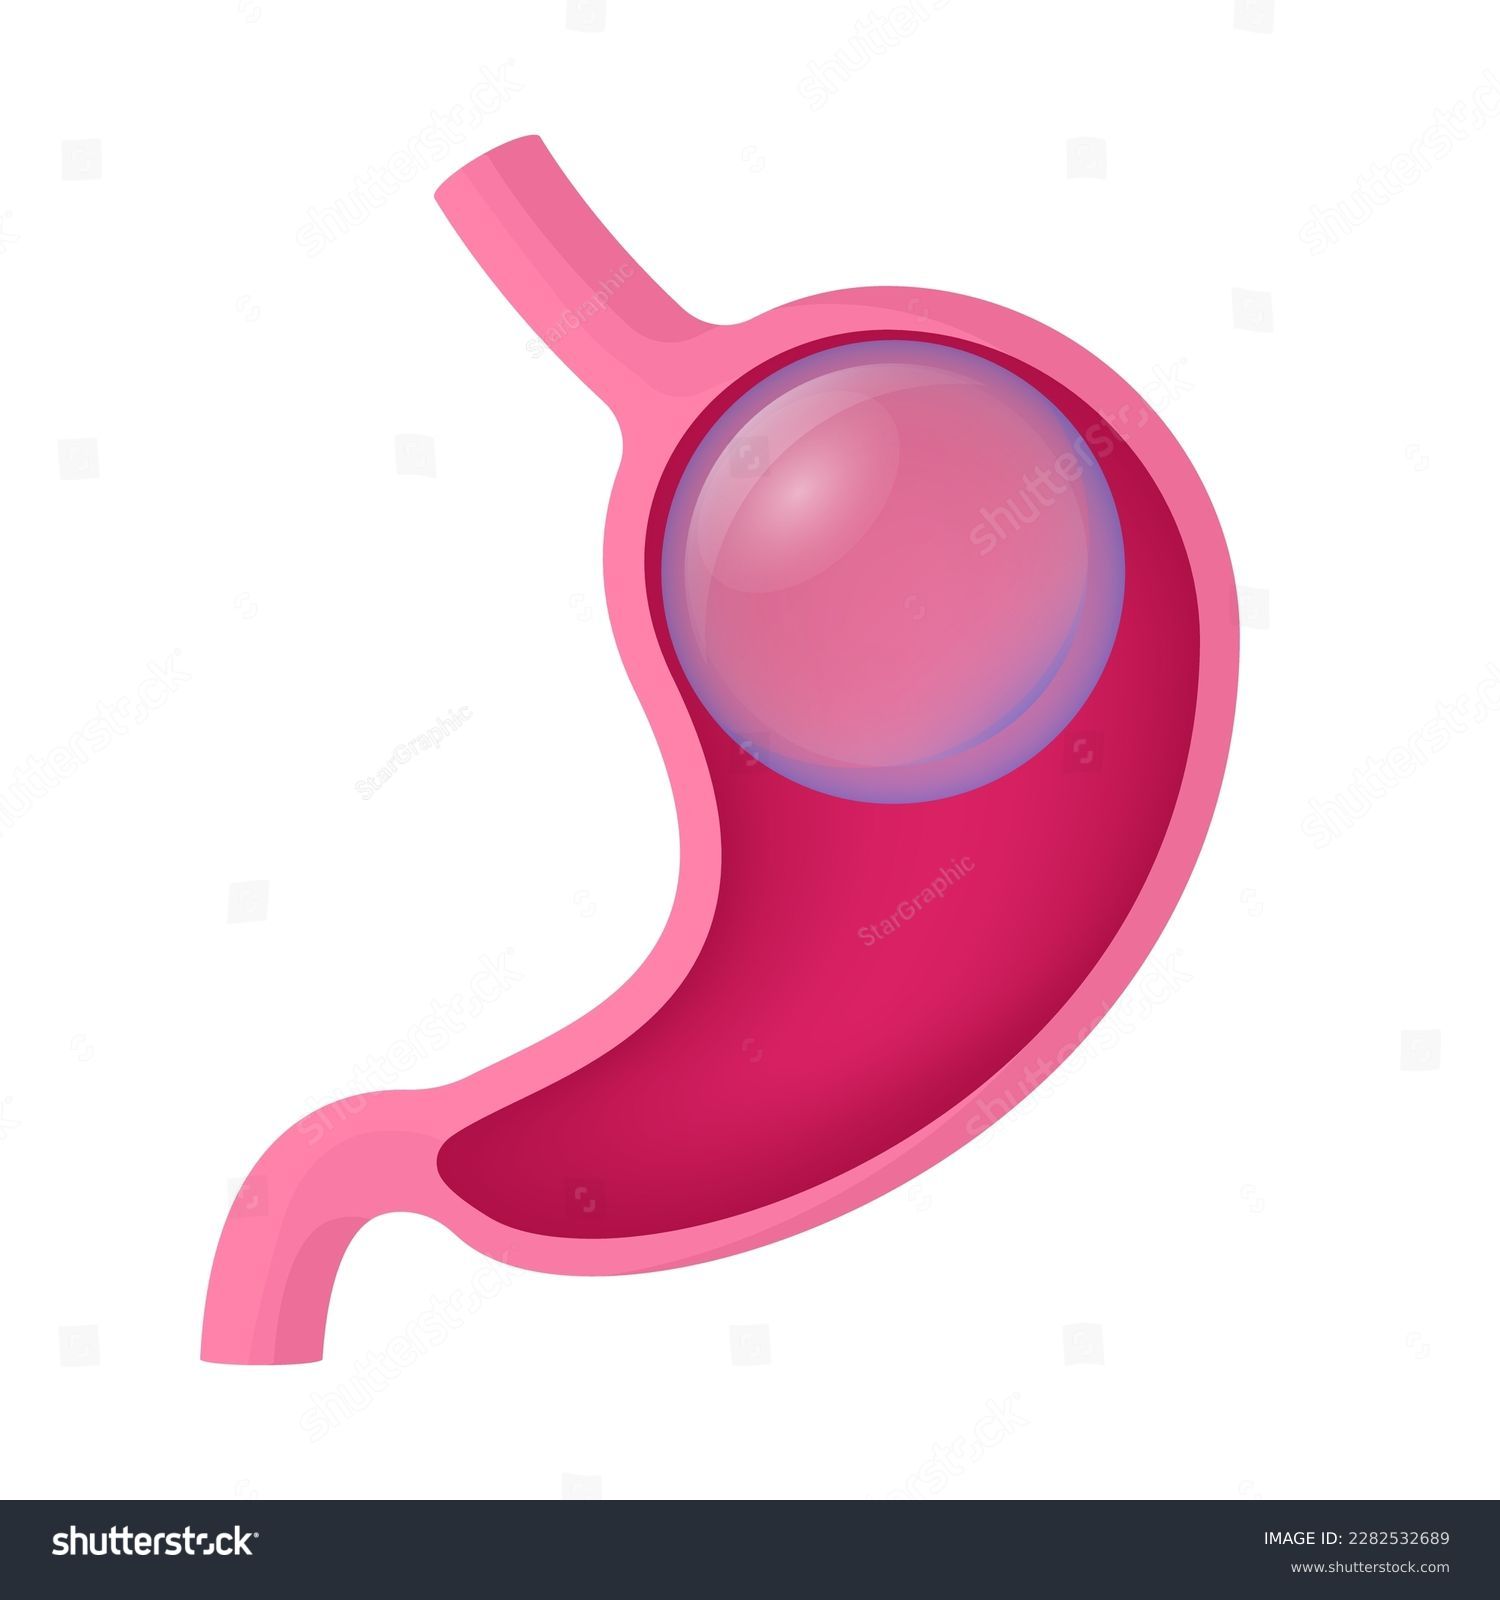 Comprehensive Guide to Gastric Balloon Procedure Prices in Turkey